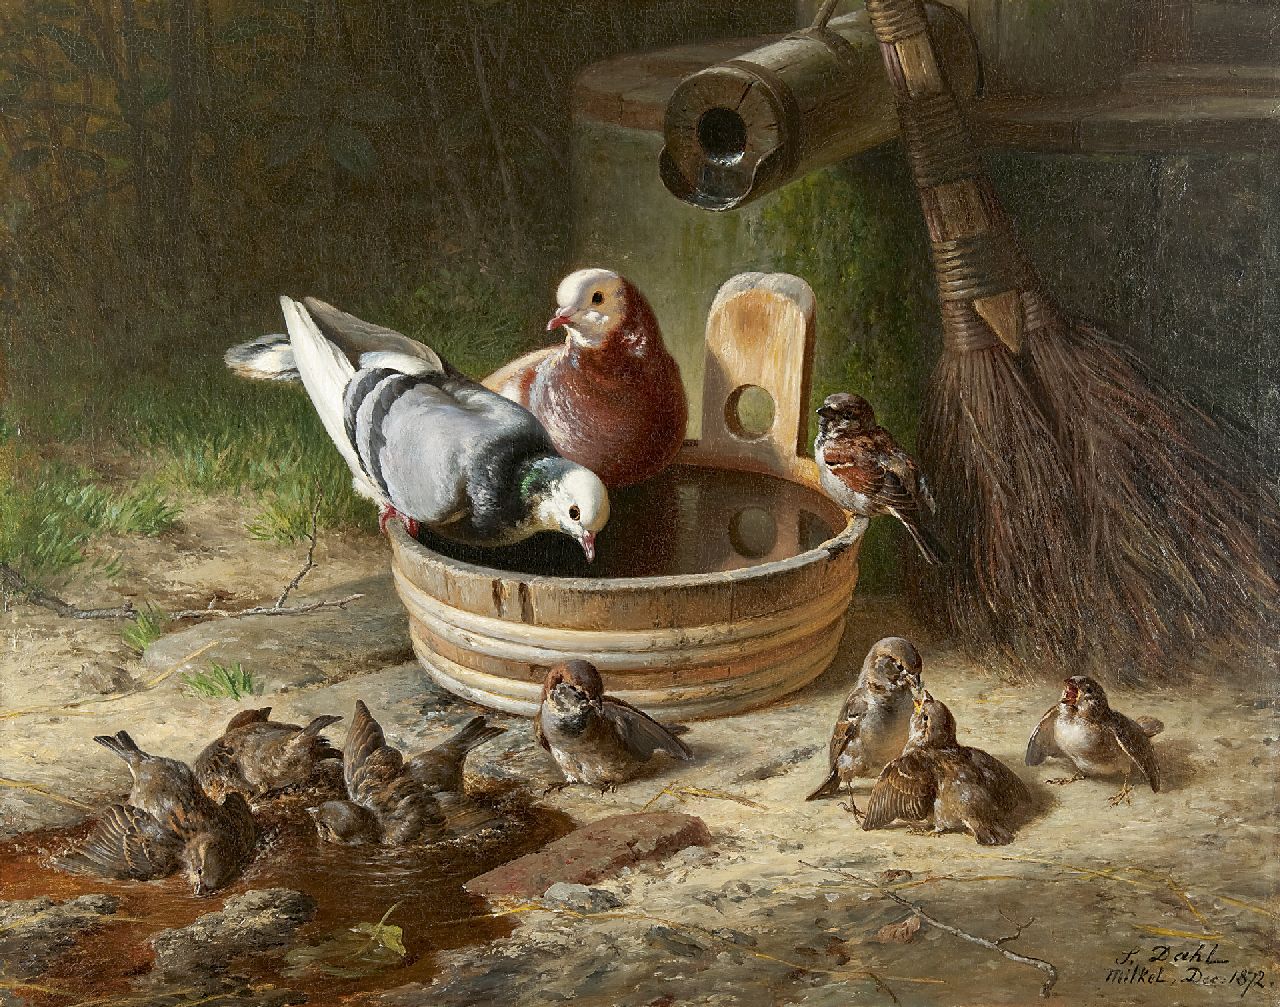 Dahl J.S.  | Johannes Siegwald 'Hans' Dahl, Drinking pigeons and sparrows, oil on canvas 70.7 x 90.0 cm, signed l.r. and dated 'Milkel' Dec. 1872